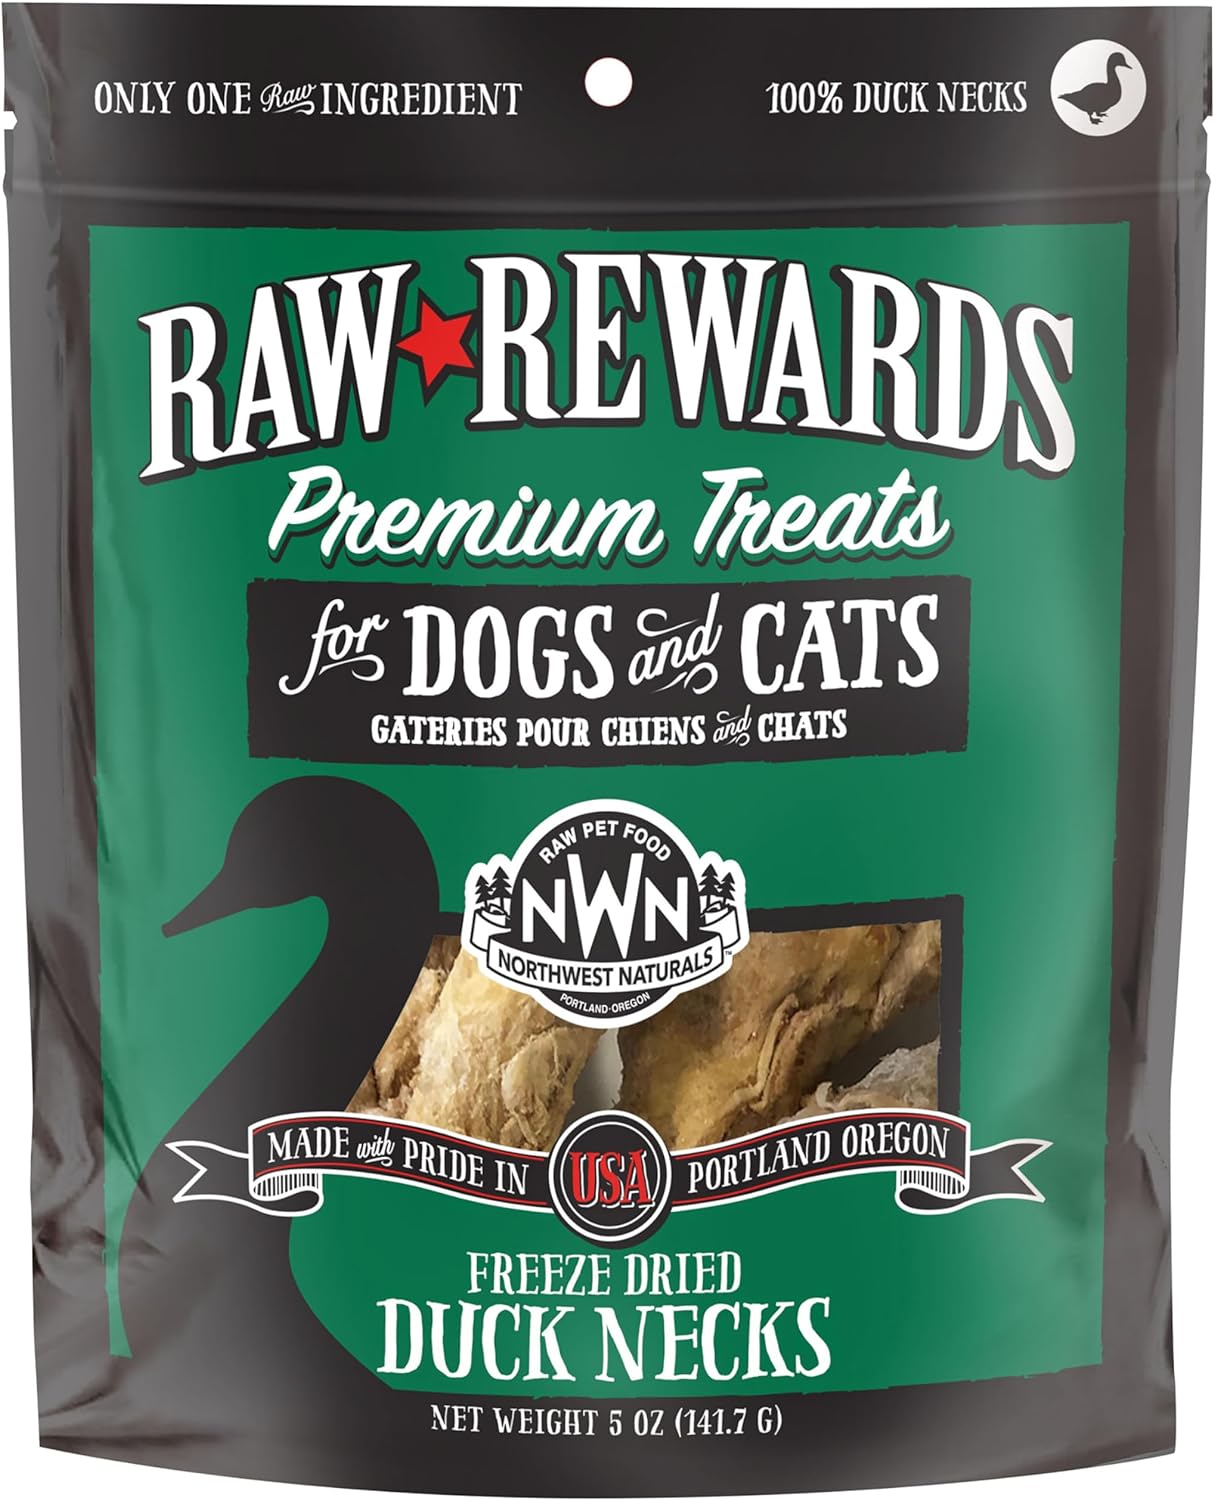 Northwest Naturals Raw Rewards Freeze-Dried Duck Neck Treats for Dogs and Cats - Whole Neck - Healthy, 1 Ingredient, Human Grade Pet Food, All Natural - 5 Oz (Packaging May Vary)